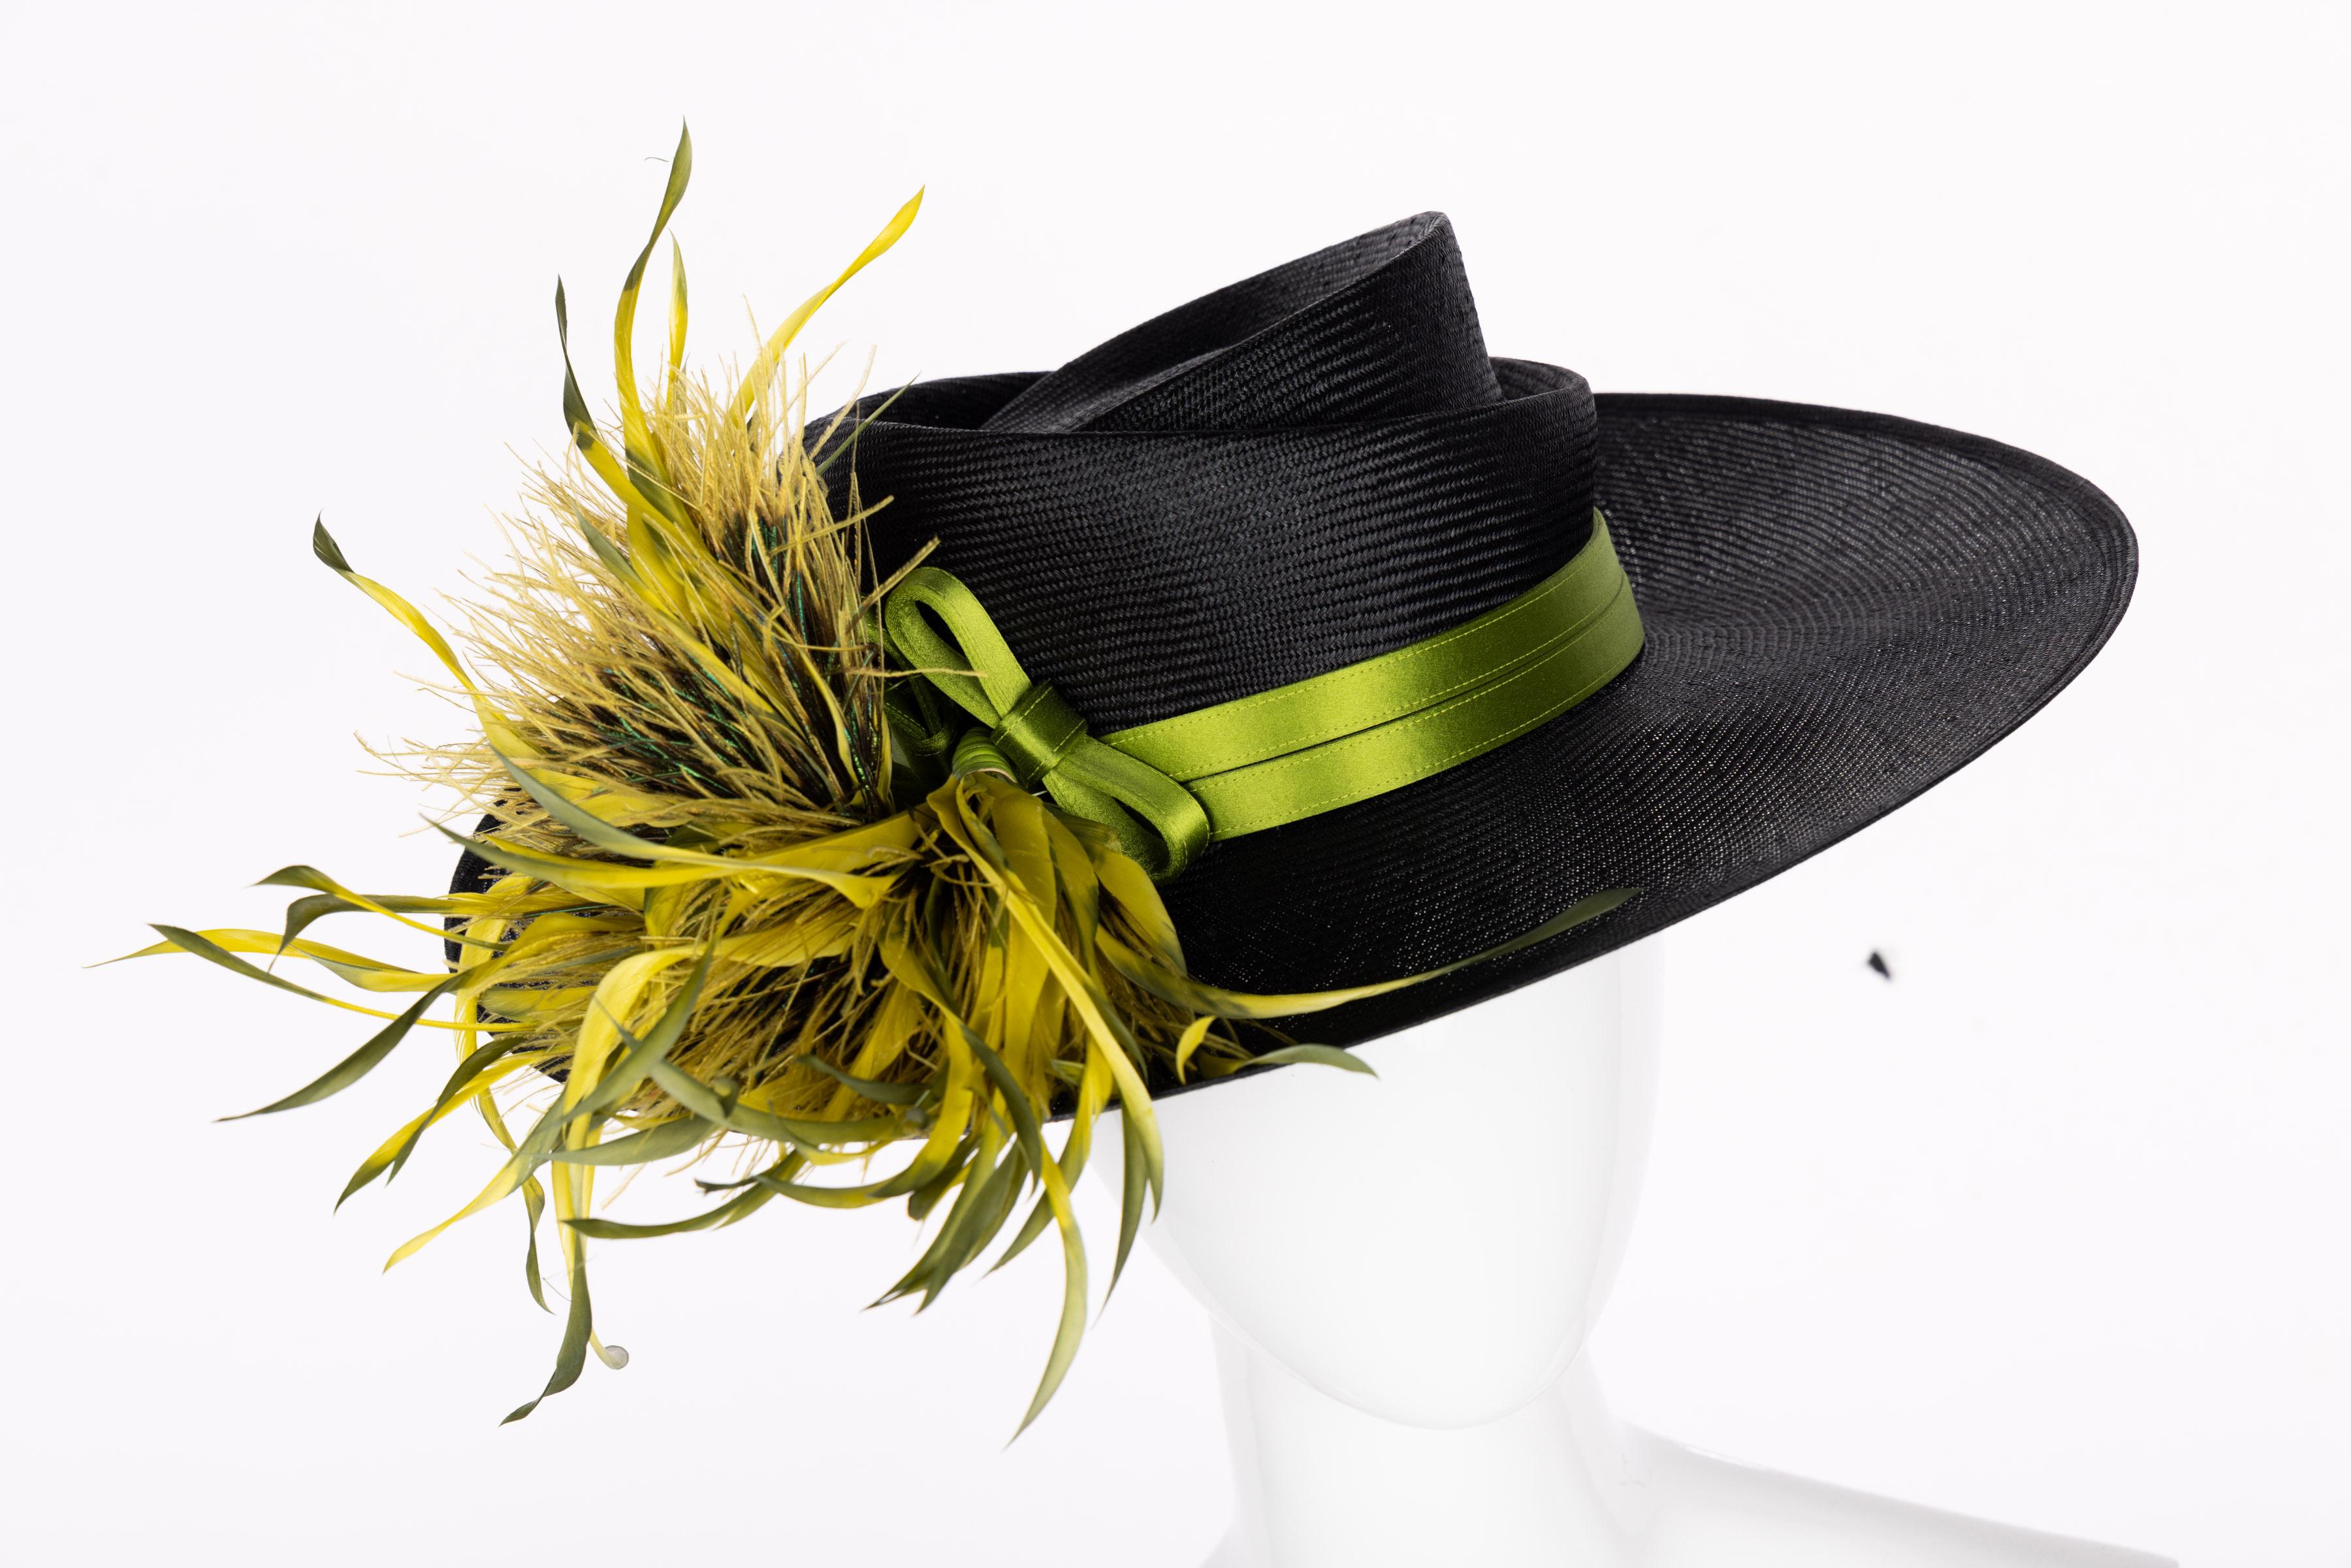 Declared as “perhaps the greatest living milliner” by Vogue, Phillip Treacy was discovered by Isabella Blow and found success early on in his career designing hats for Chanel. The first milliner in 80 years invited to design for the haute couture